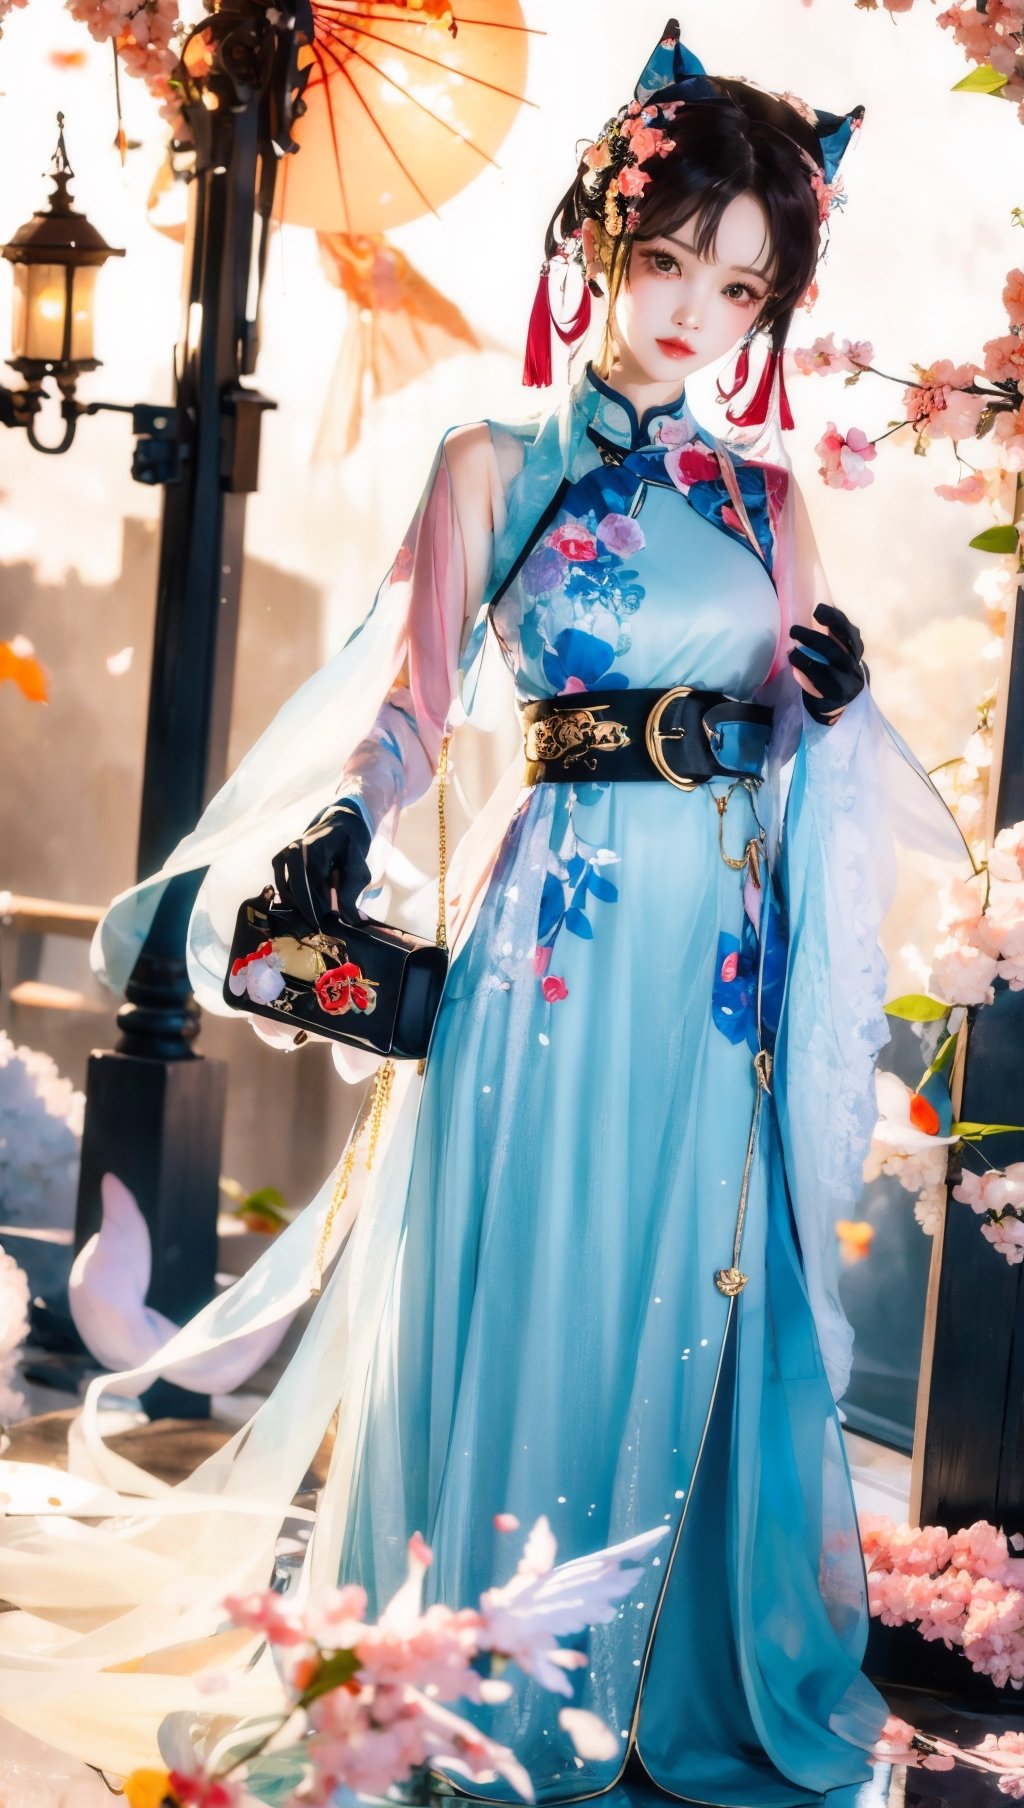 JinxLol,mature female,1girl, solo,looking at viewer, gloves, fingerless gloves,cheongsam, character name, looking at viewer, gun, belt,outdoors,lora:JinxLolEp8dim8:1, lora:JinxLol:1,wearing cheongsam,one piece,Holding a fan in one hand, JeeSoo,